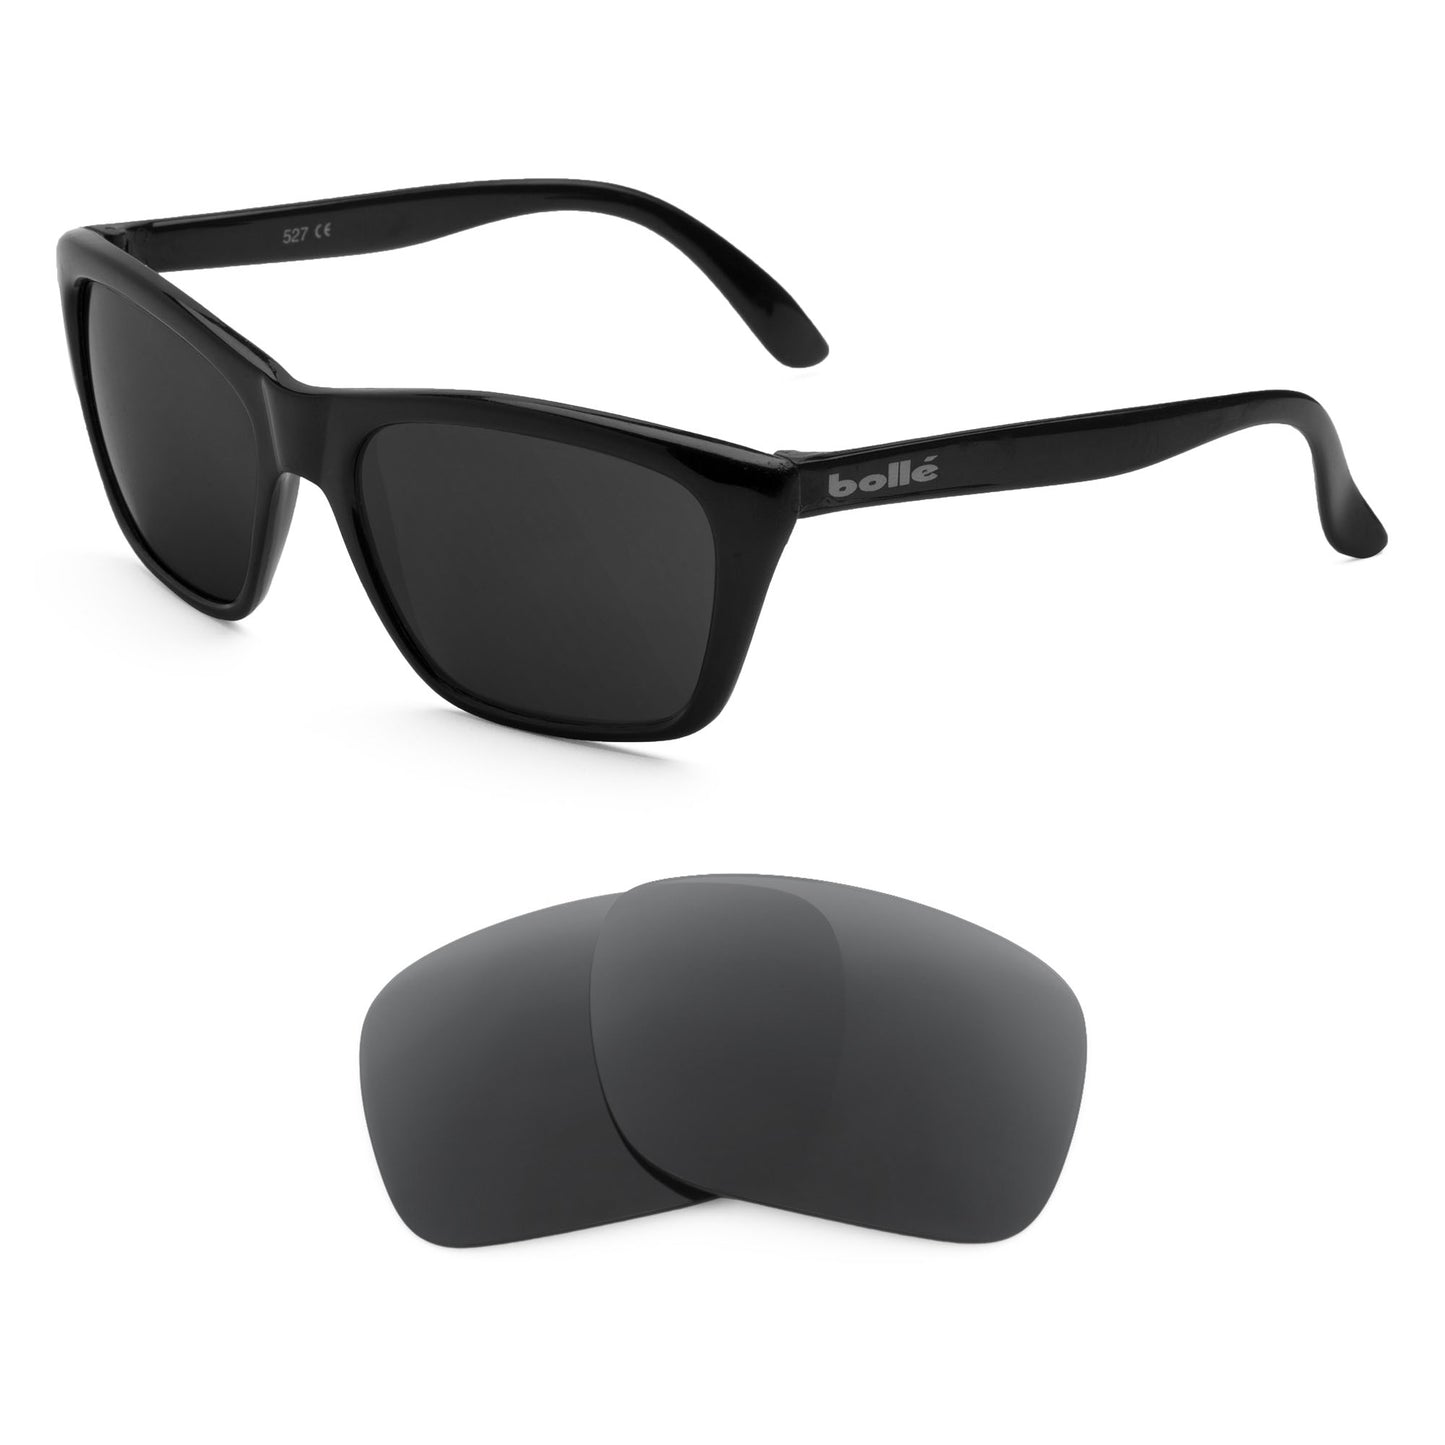 Bolle 527 sunglasses with replacement lenses